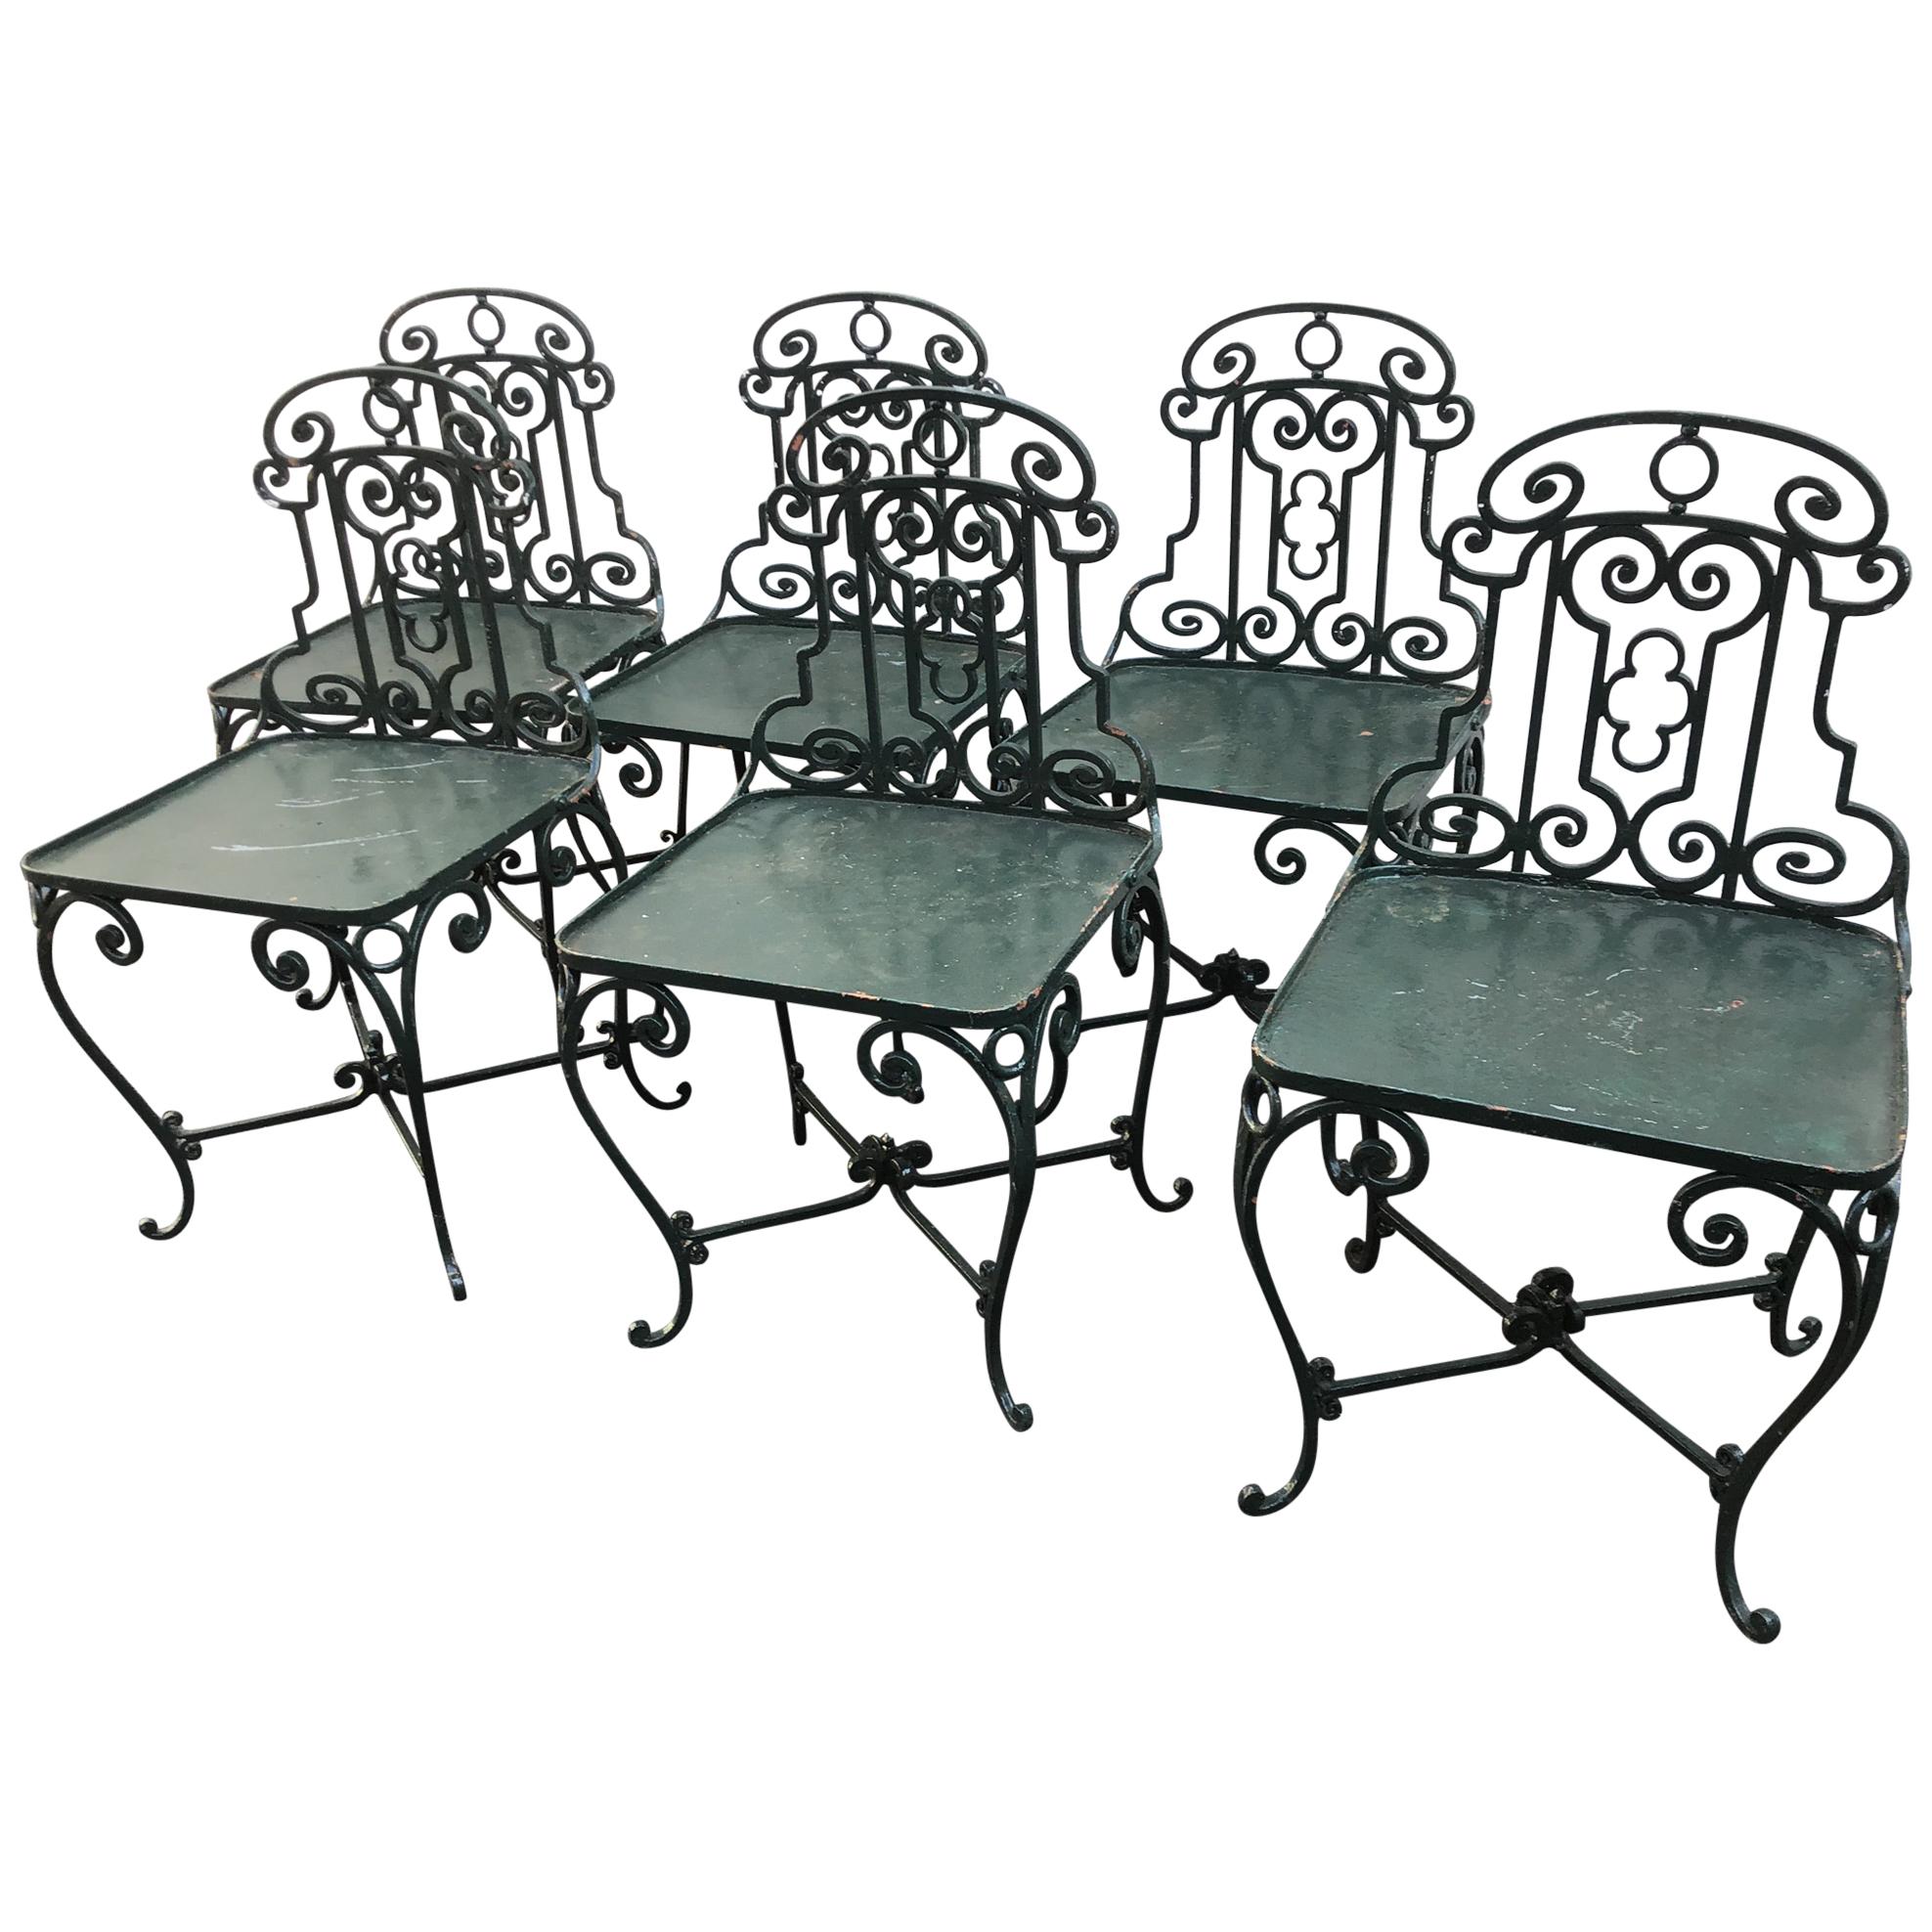 Six 1940s French Wrought Iron Garden Chairs